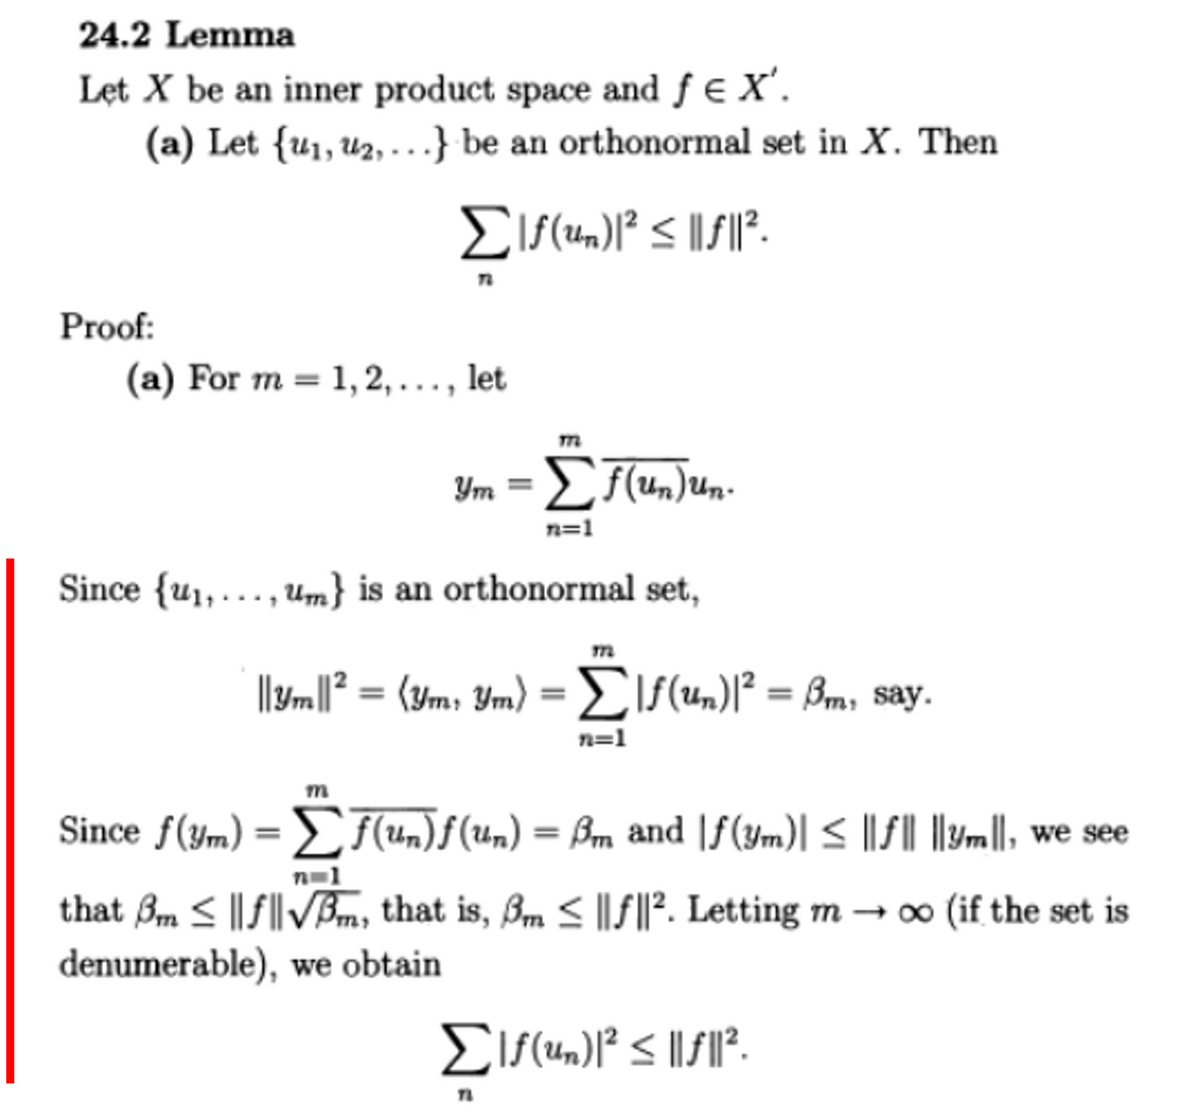 24.2 Lemma
Let X be an inner product space and ƒ € X'.
(a) Let {u₁, ₂,...} be an orthonormal set in X. Then
Σlf(un)1² ≤||f||².
Proof:
(a) For m=1,2,..., let
Ym = Σf(un)un.
n=1
Since {u₁,, um} is an orthonormal set,
m
m
||3m||² = (ym, Ym) = |ƒ(un)|² = ßm, say.
n=1
Since f(ym) = [ƒ(un)ƒ (un) = ßm and |ƒ(ym)| ≤ ||ƒ|| ||ym||, we see
n=1
that 3m ≤||f||√m, that is, ßm ≤ ||f||². Letting m→ ∞o (if the set is
denumerable), we obtain
Σlf(un)1² ≤||f||².